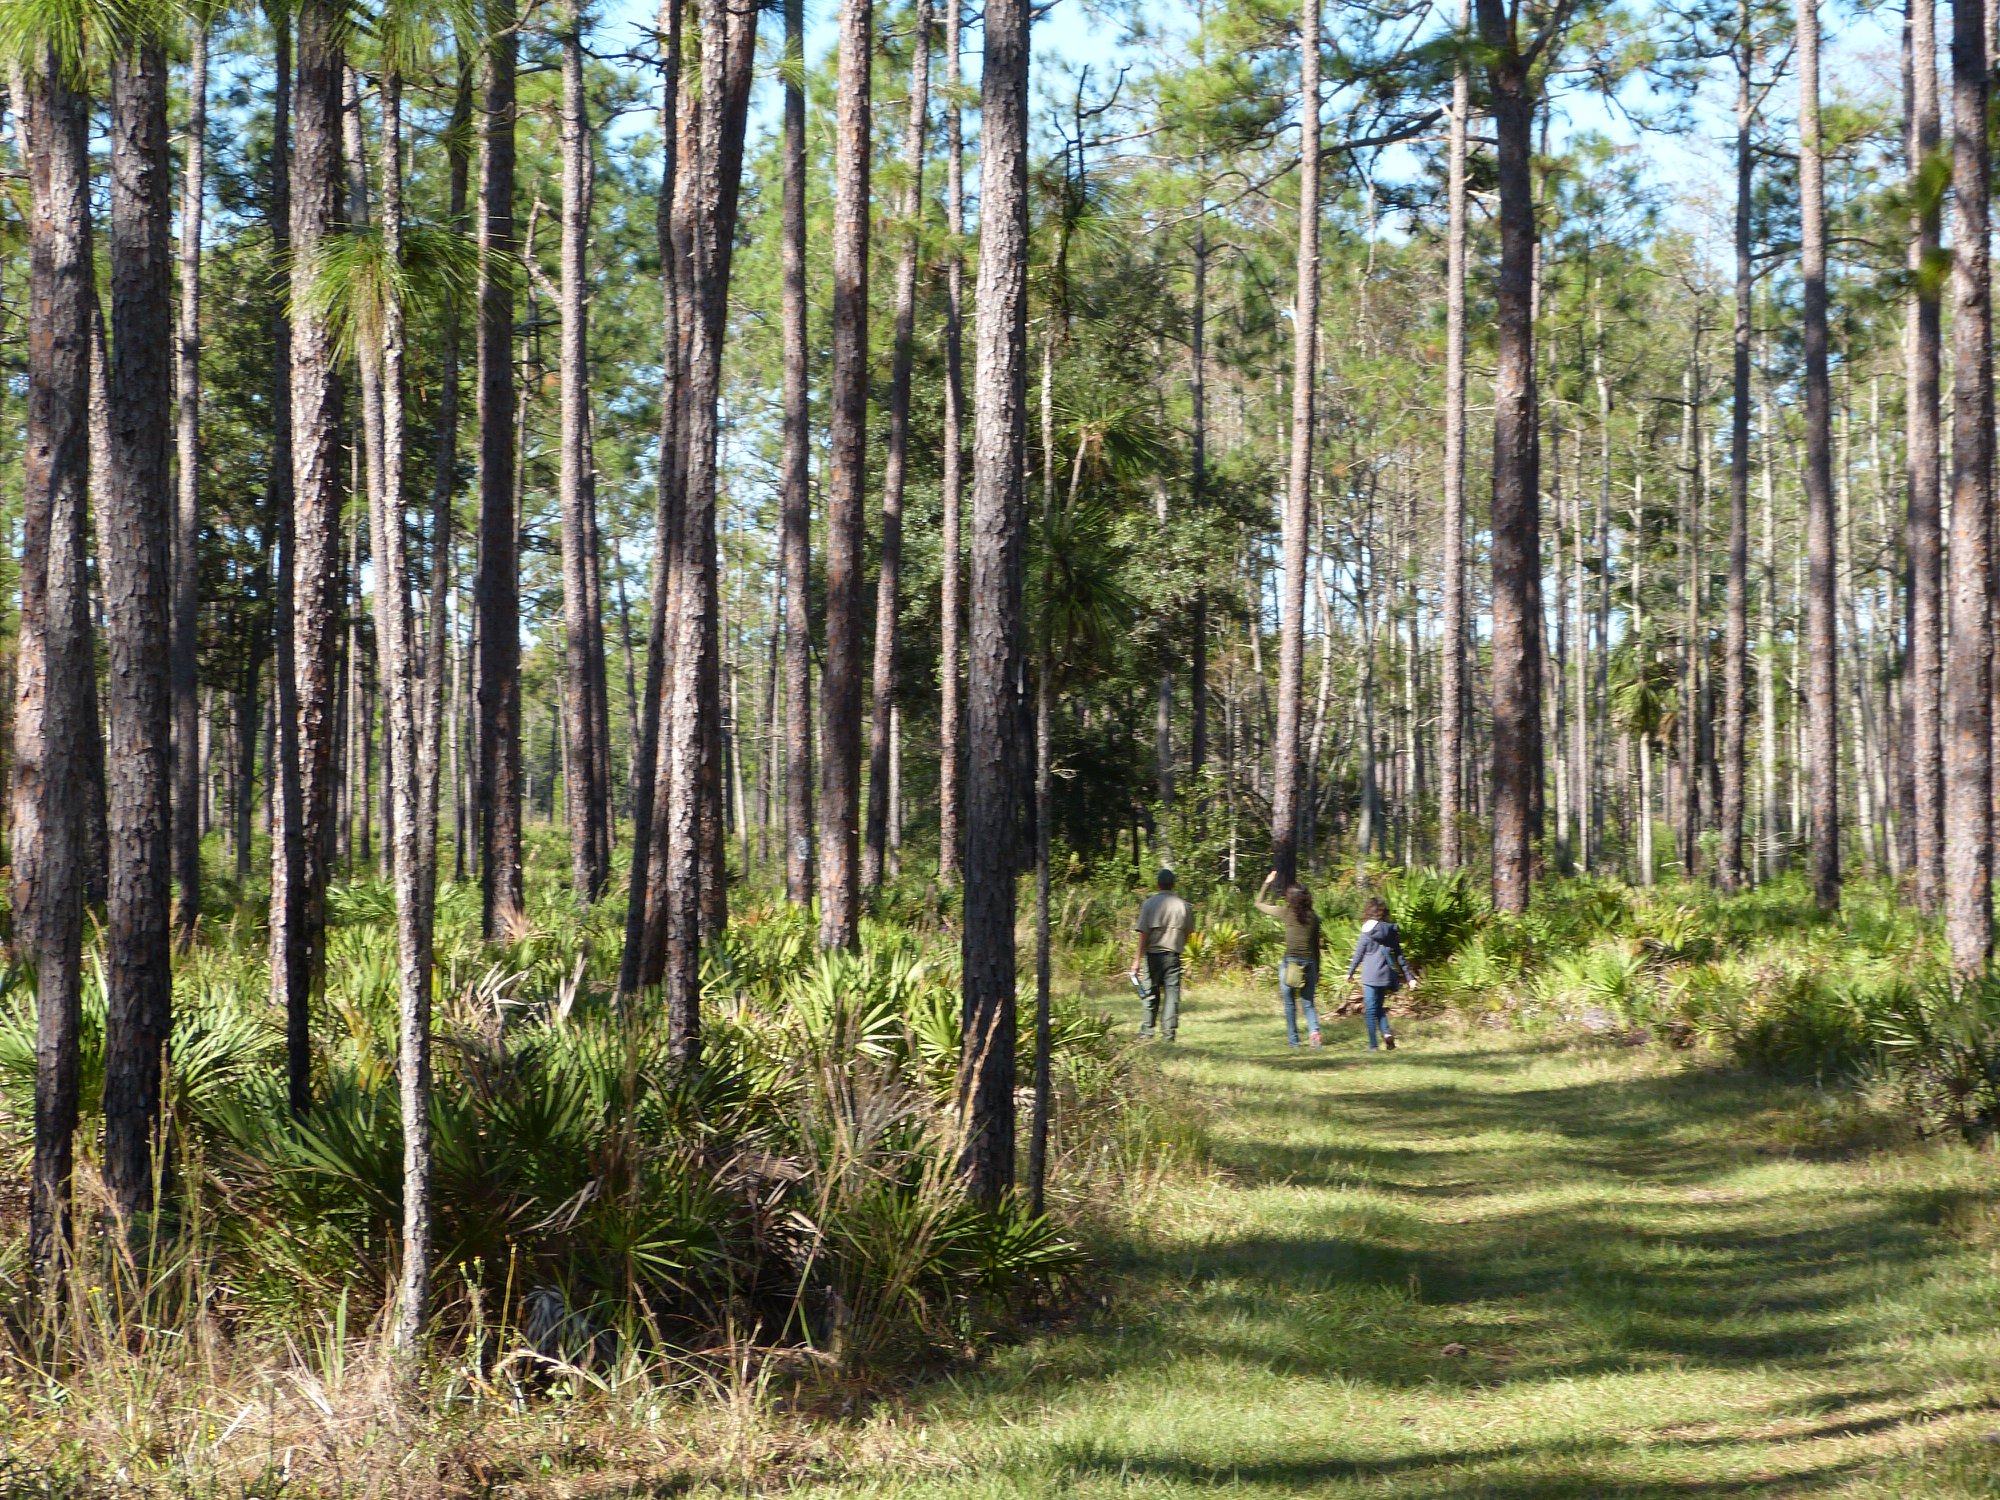 Long Leaf pine flatwood with three people walking in the distance